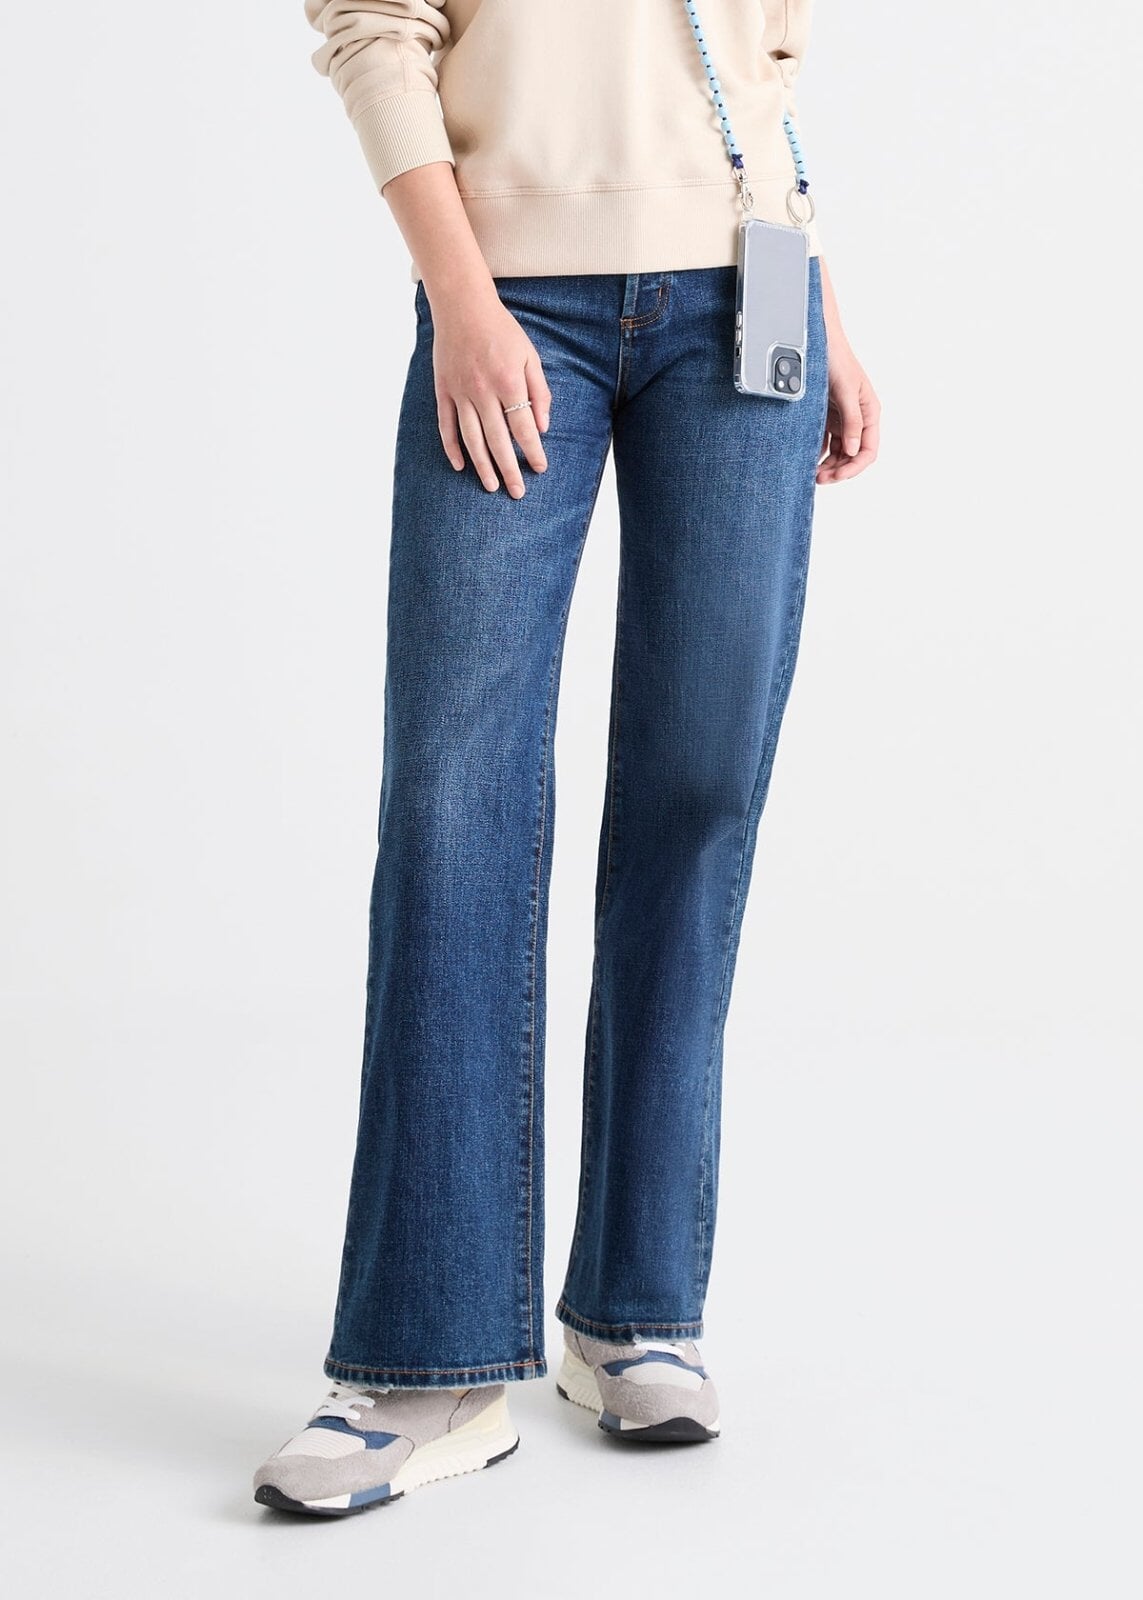 Women's Wide Leg Jeans Seamed Front Wide Leg Jeans Solid Color Casual  Trousers